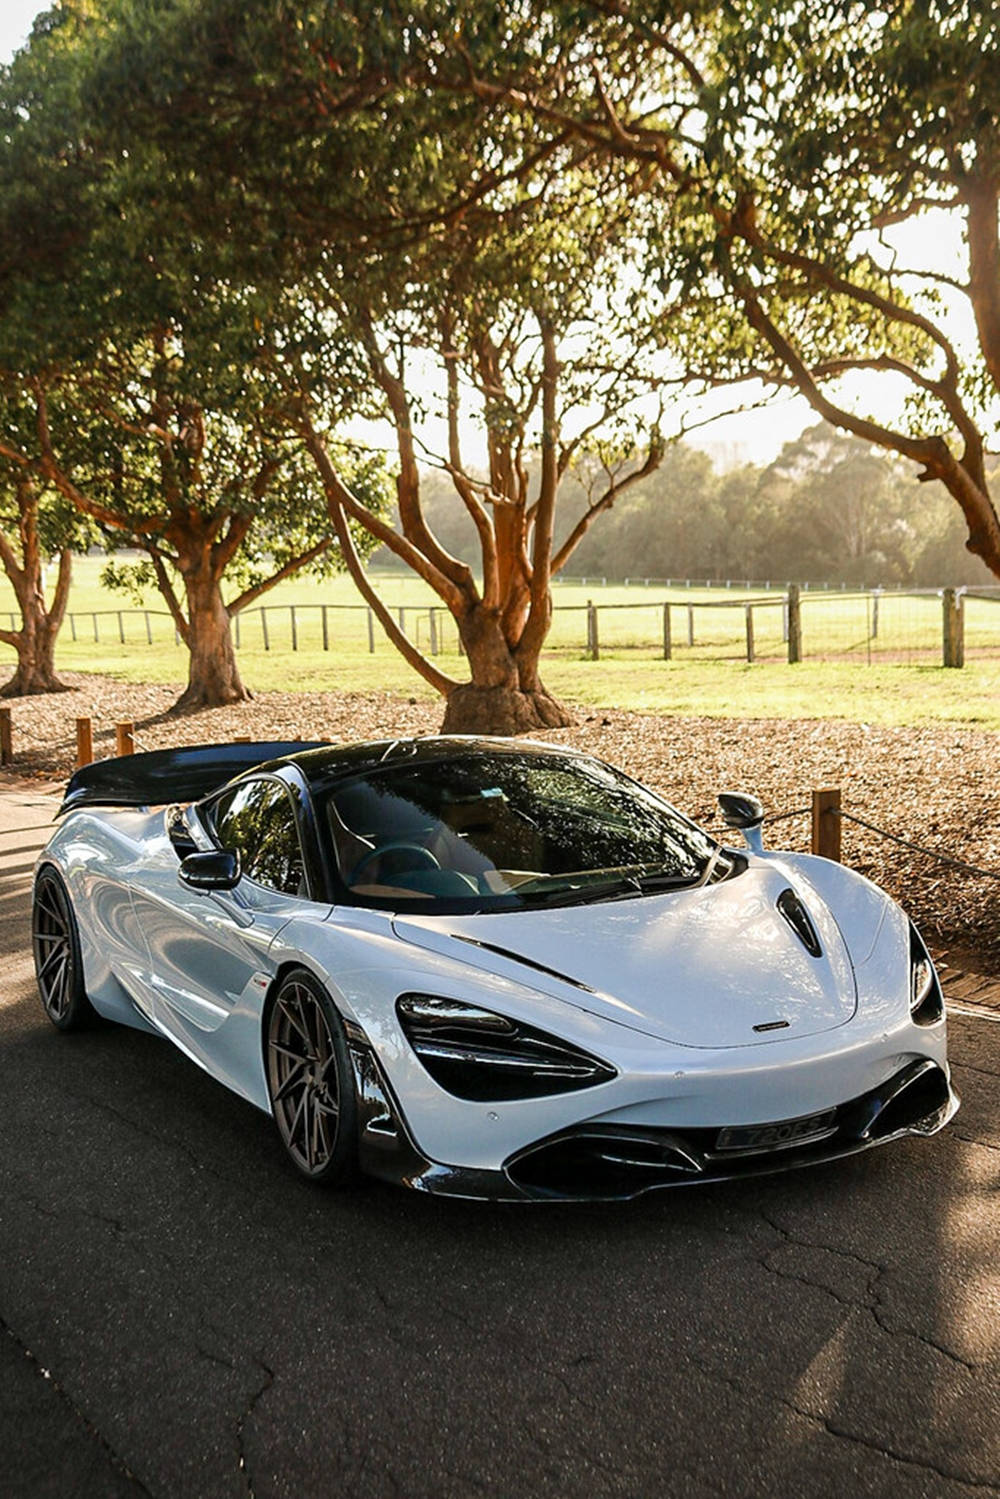 Mclaren 720s White Car By Trees Phone